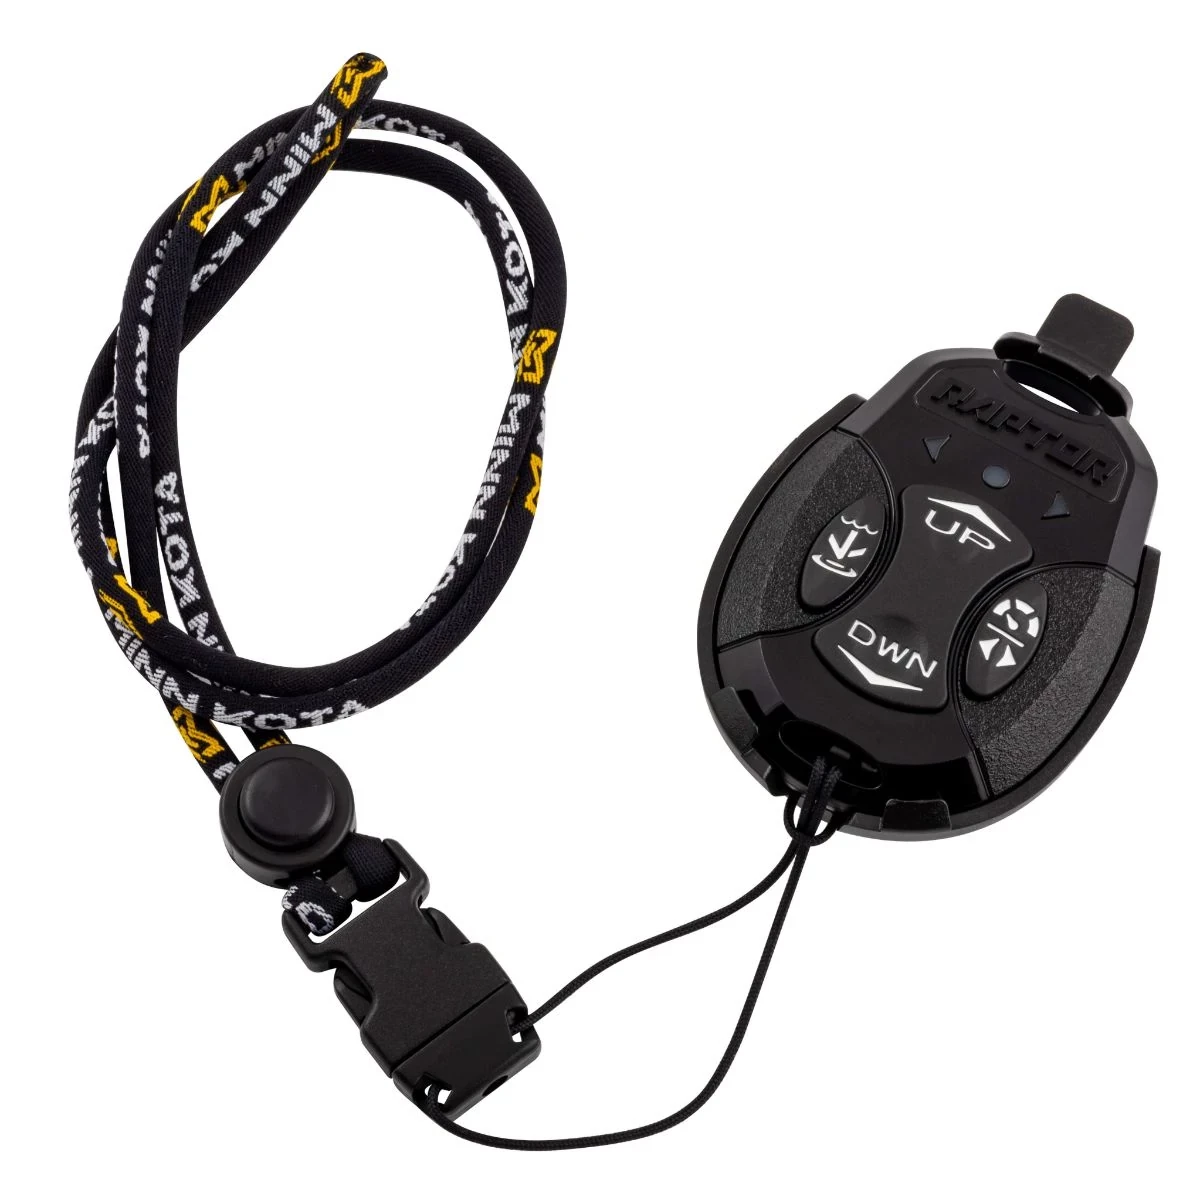 Raptor Remote uncapped with lanyard